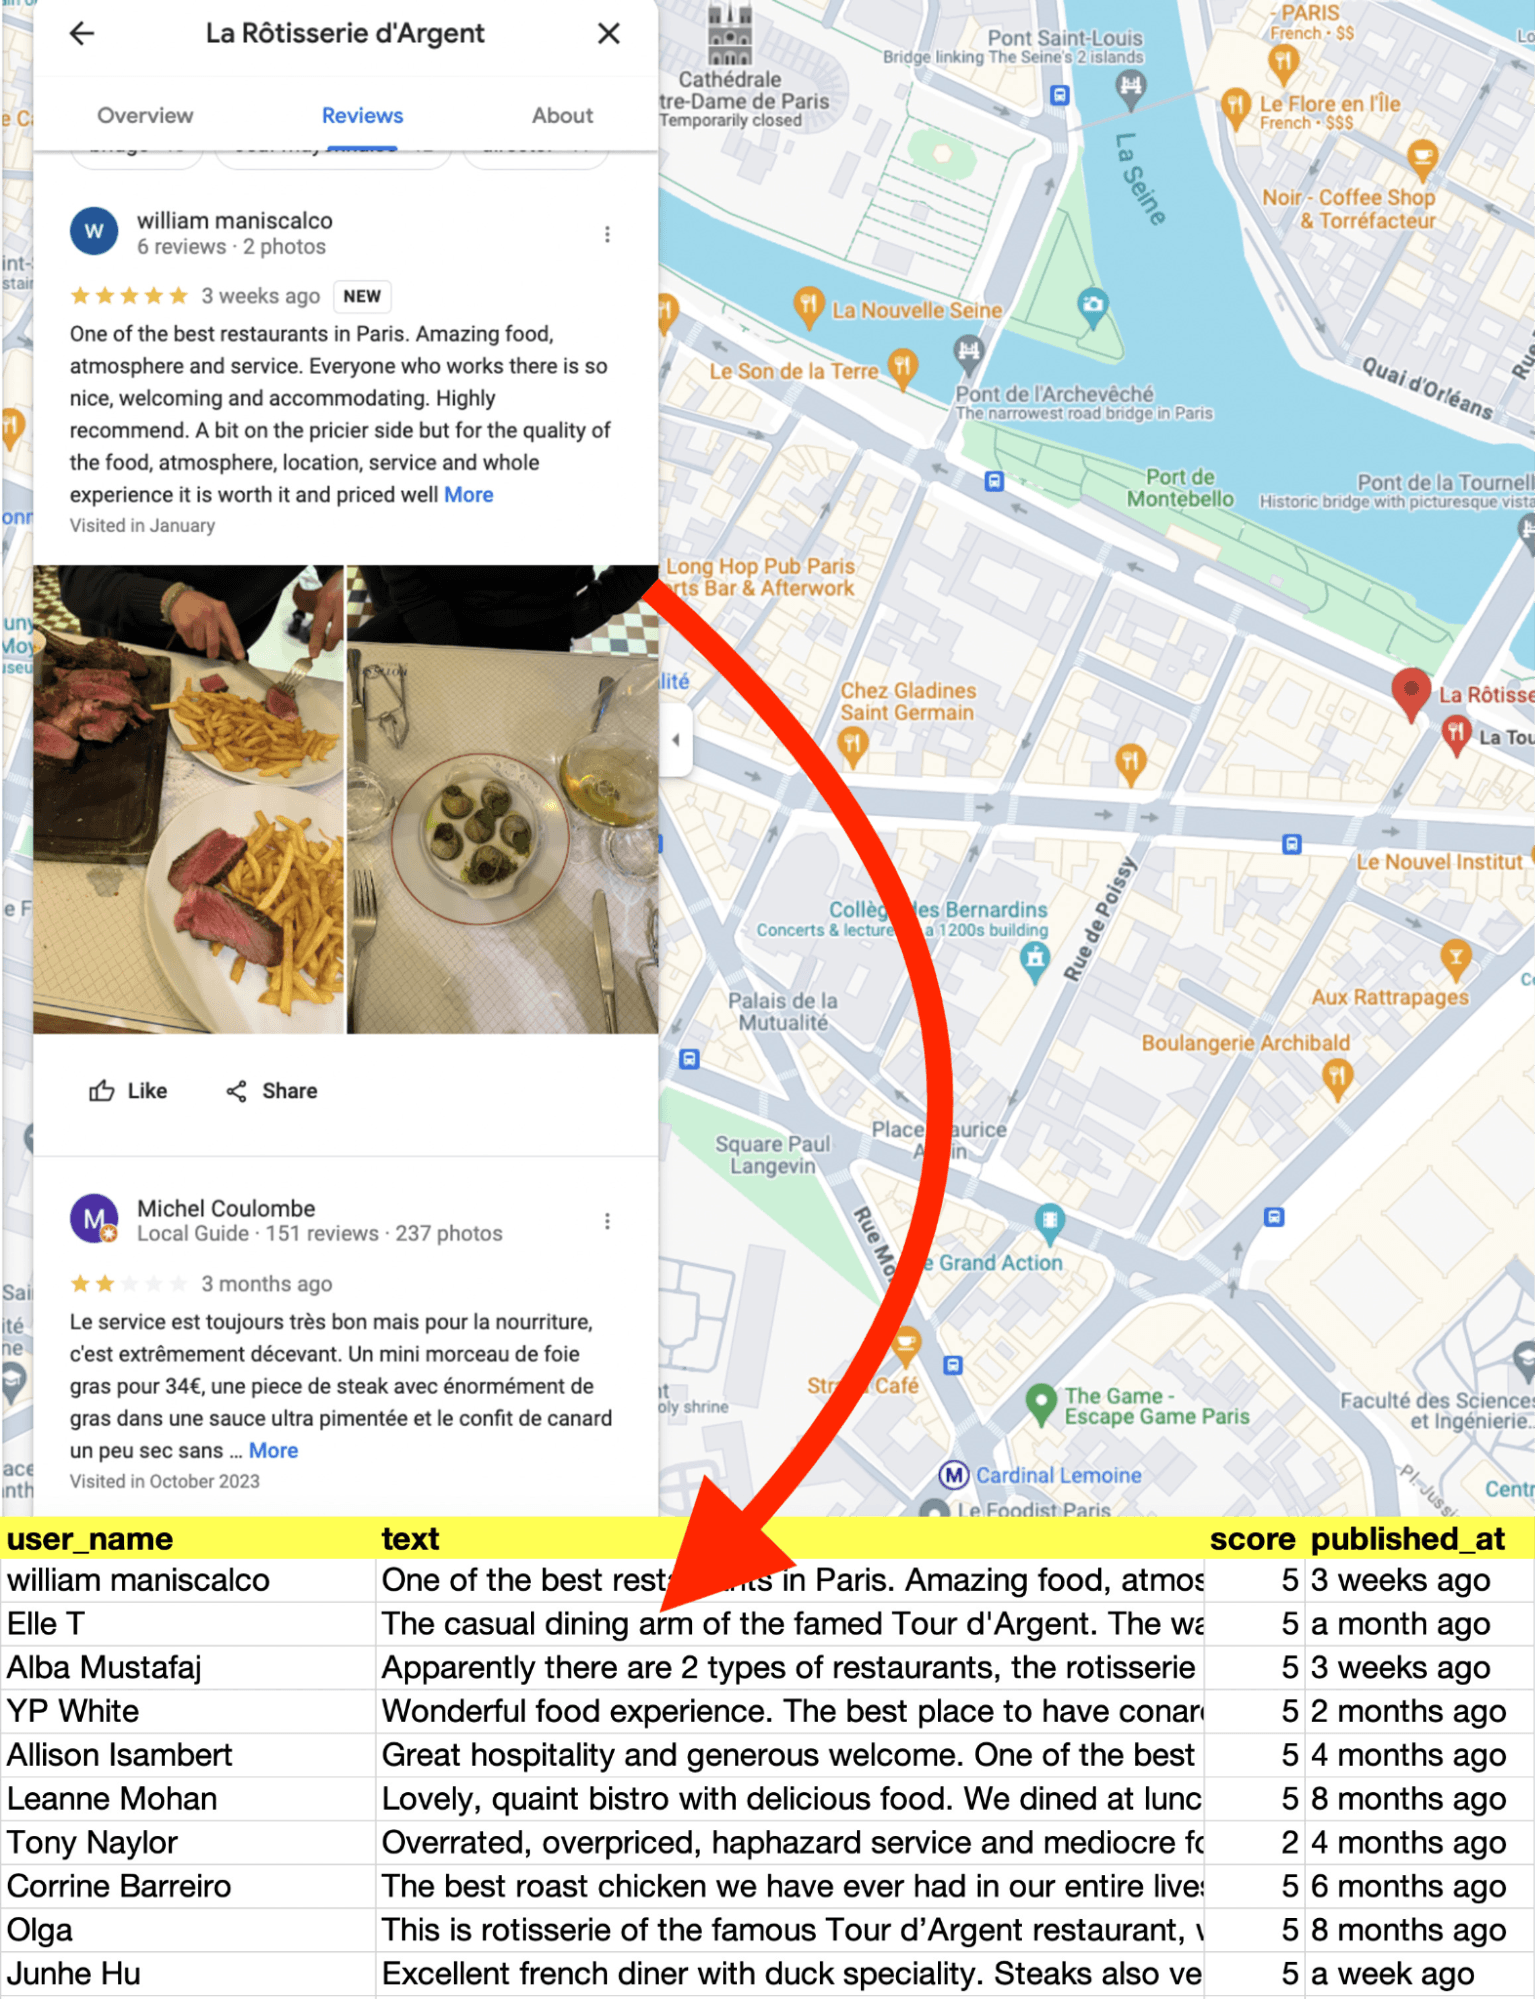 google maps reviews scraper before after - image3.png